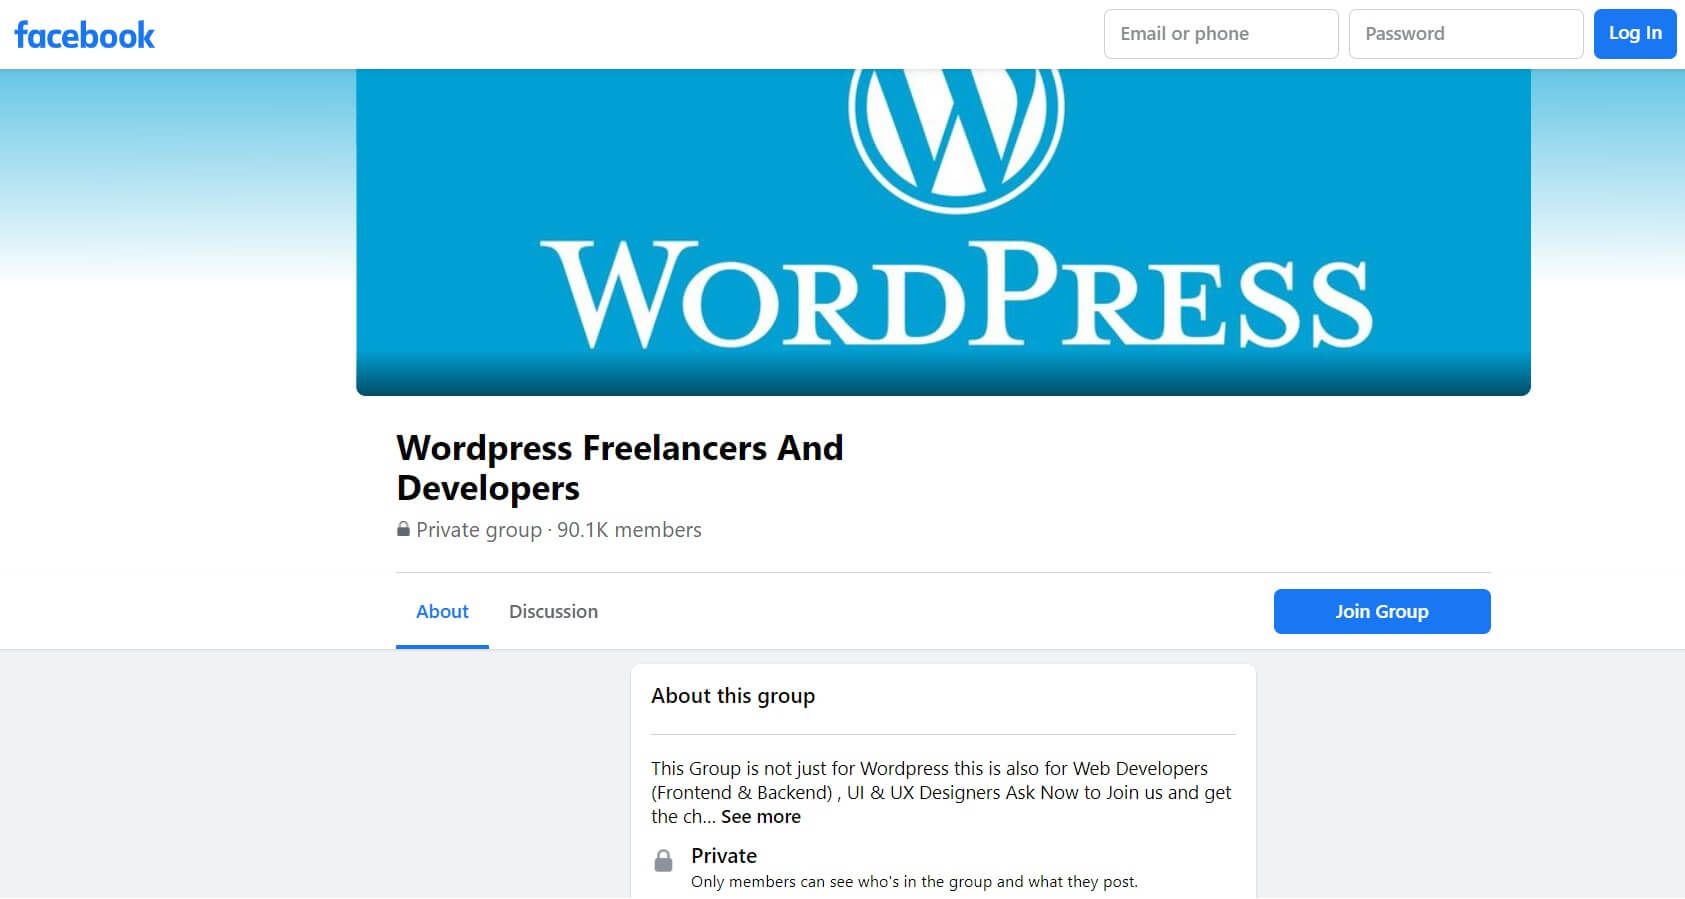 The Facebook 'WordPress Freelancers And Developers' group page